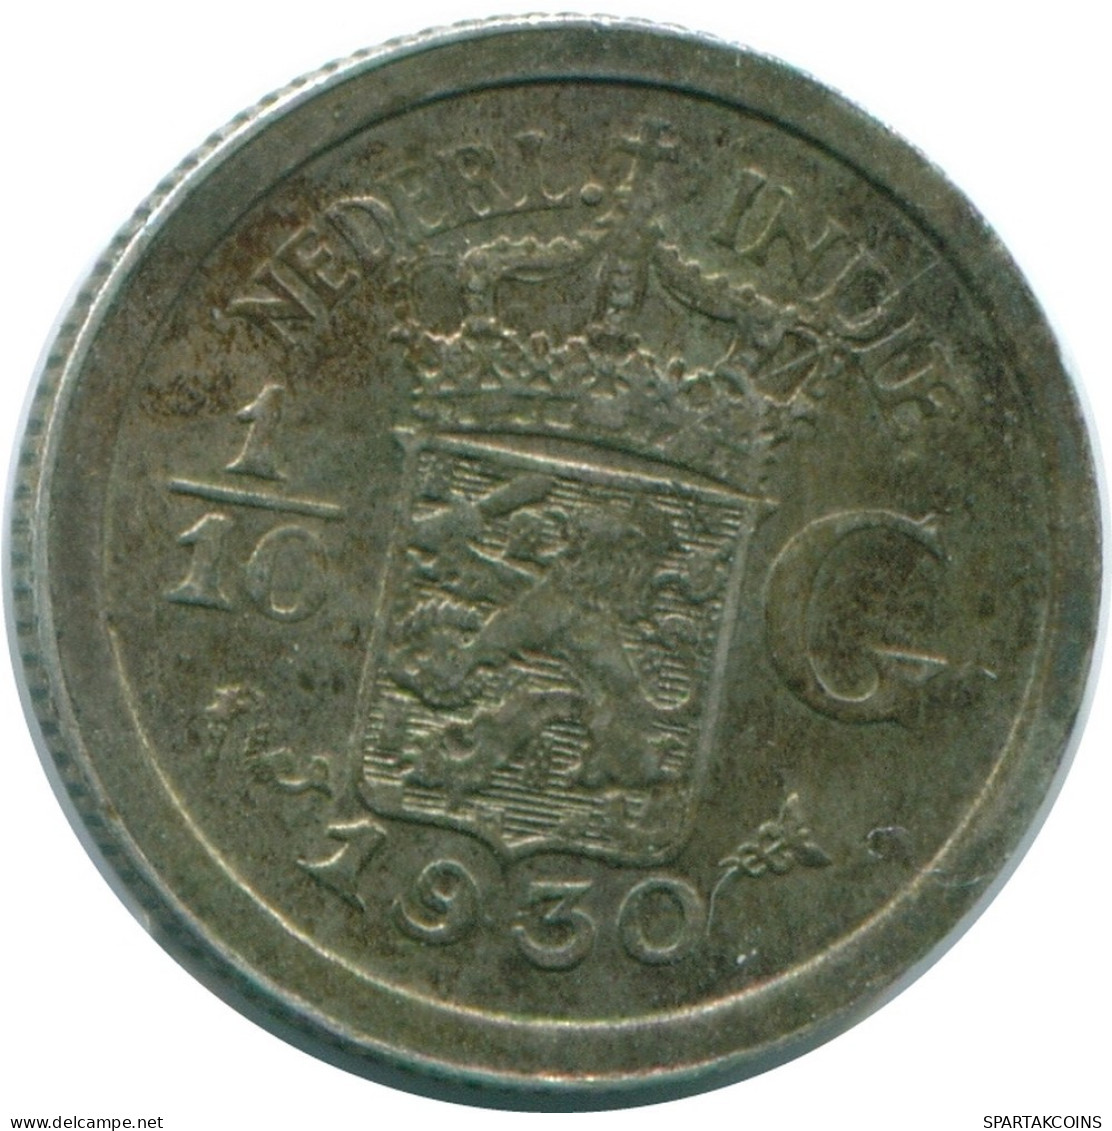 1/10 GULDEN 1930 NETHERLANDS EAST INDIES SILVER Colonial Coin #NL13454.3.U.A - Indes Neerlandesas